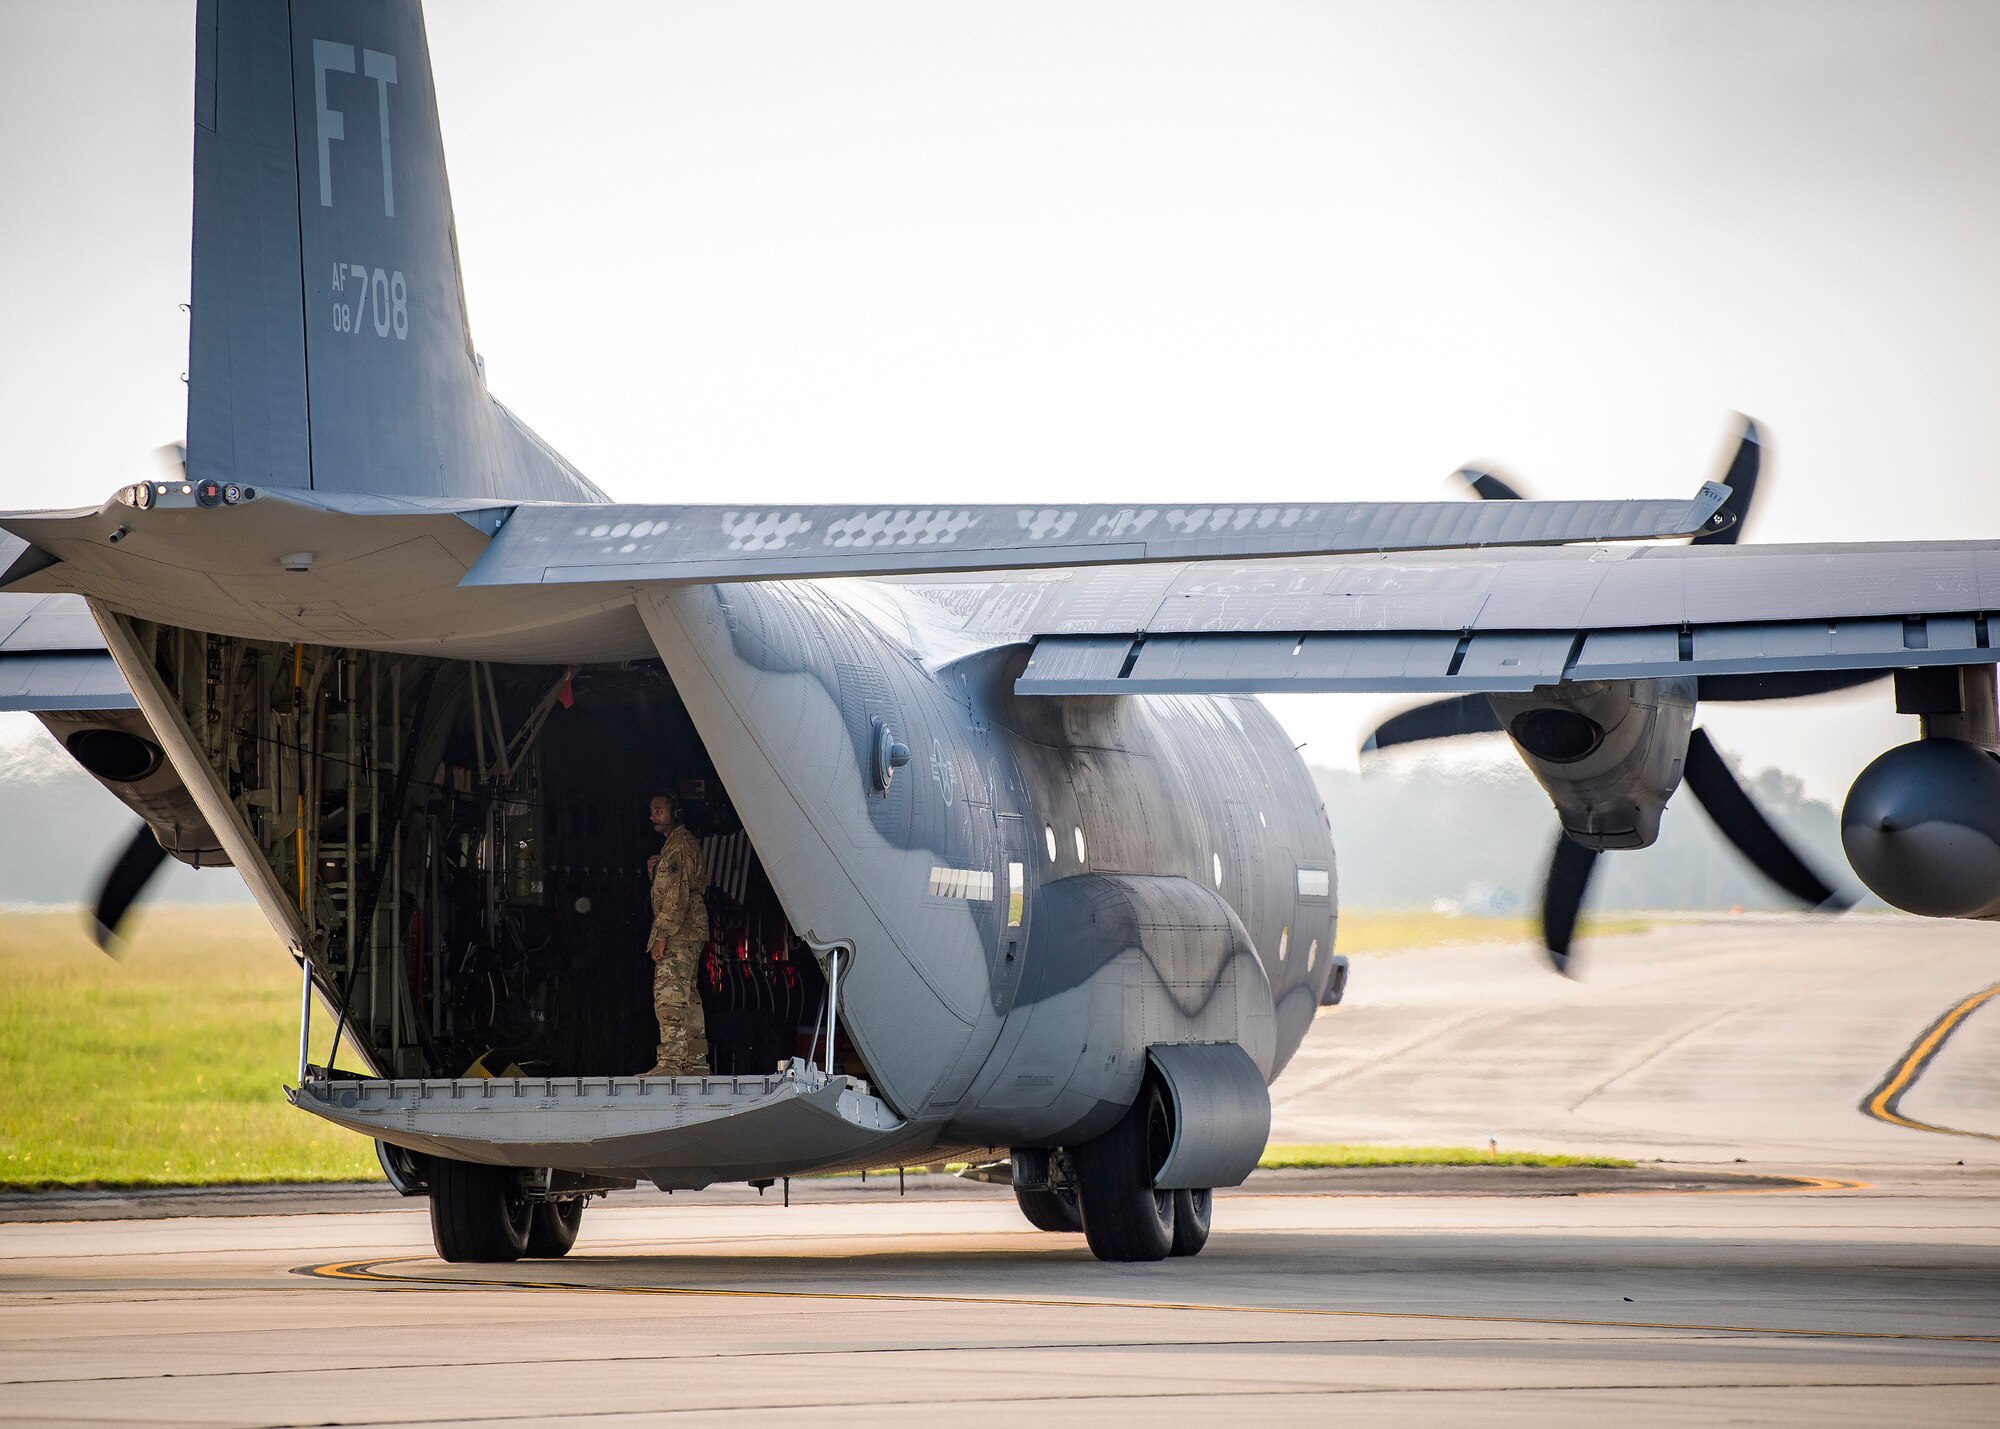 An Airman from the 71st Aircraft Maintenance Unit (AMU), inspects an HC-130J Combat King II, Aug. 13, 2019, at Moody Air Force Base, Ga. Airmen from the 71st AMU perform various tasks prior to take off to ensure the aircraft is performing optimally to complete its mission of supporting the 71st Rescue Squadron. Those tasks consist of: pre-flight inspection, removing plugs and cover, repairing any problems found during crew pre-flight checks as well as marshaling the aircraft for takeoff. (U.S. Air Force photo by Airman 1st Class Eugene Oliver)